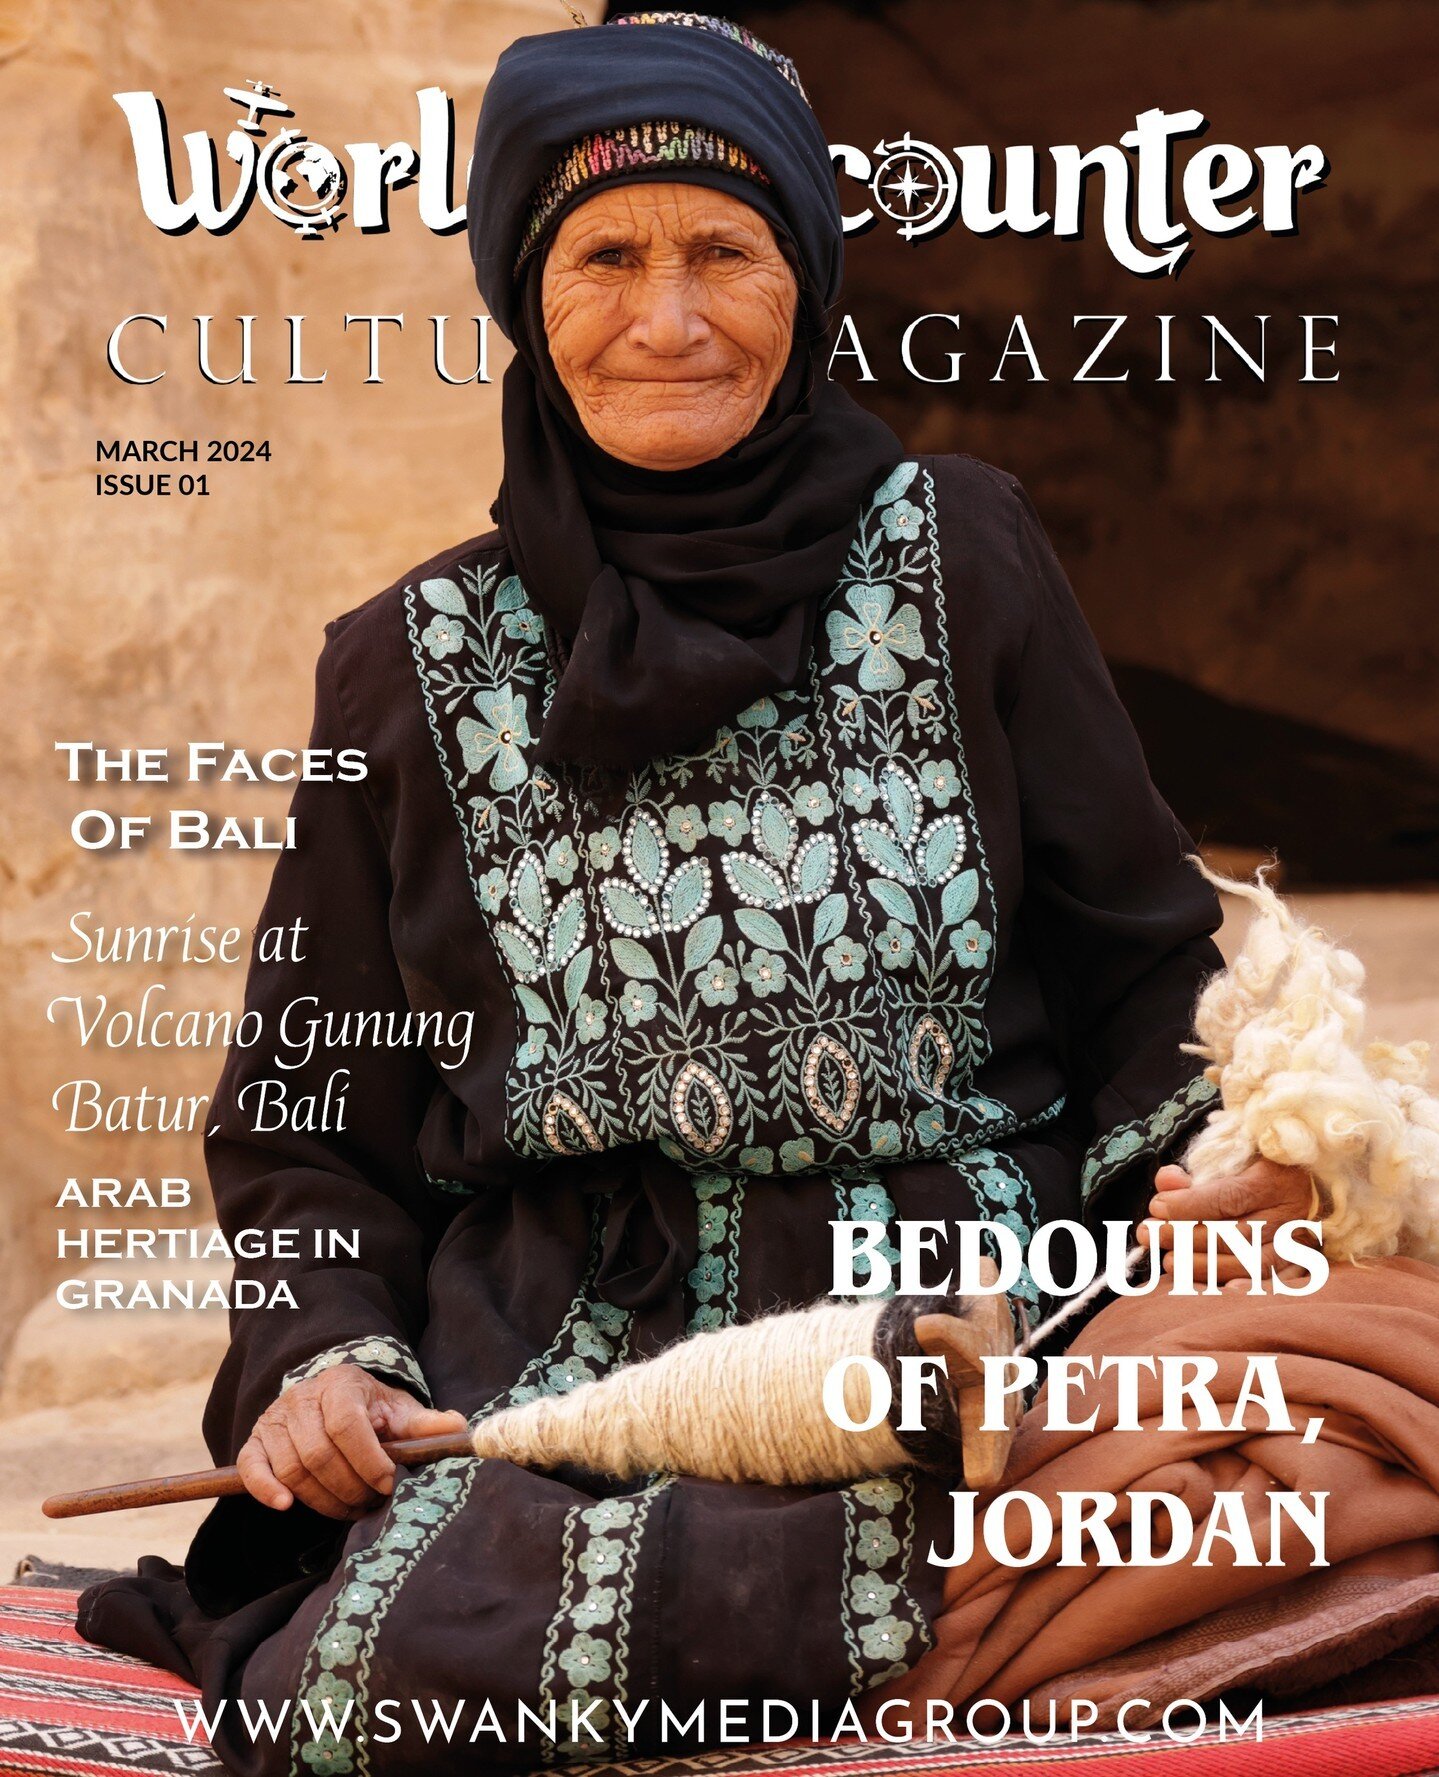 OUR MARCH ISSUES HAVE ARRIVED 🤎⁠
⁠
World Encounter Magazine - March 2024: The World Culture Edition Issue 2⁠
⁠
'Bedouins of Petra, Jordan'⁠
⁠
Photographer: Tatiana Serova⁠
IG: @pho_sots⁠
⁠
👉🏻 Purchase our Print &amp; Digital Editions on our websit